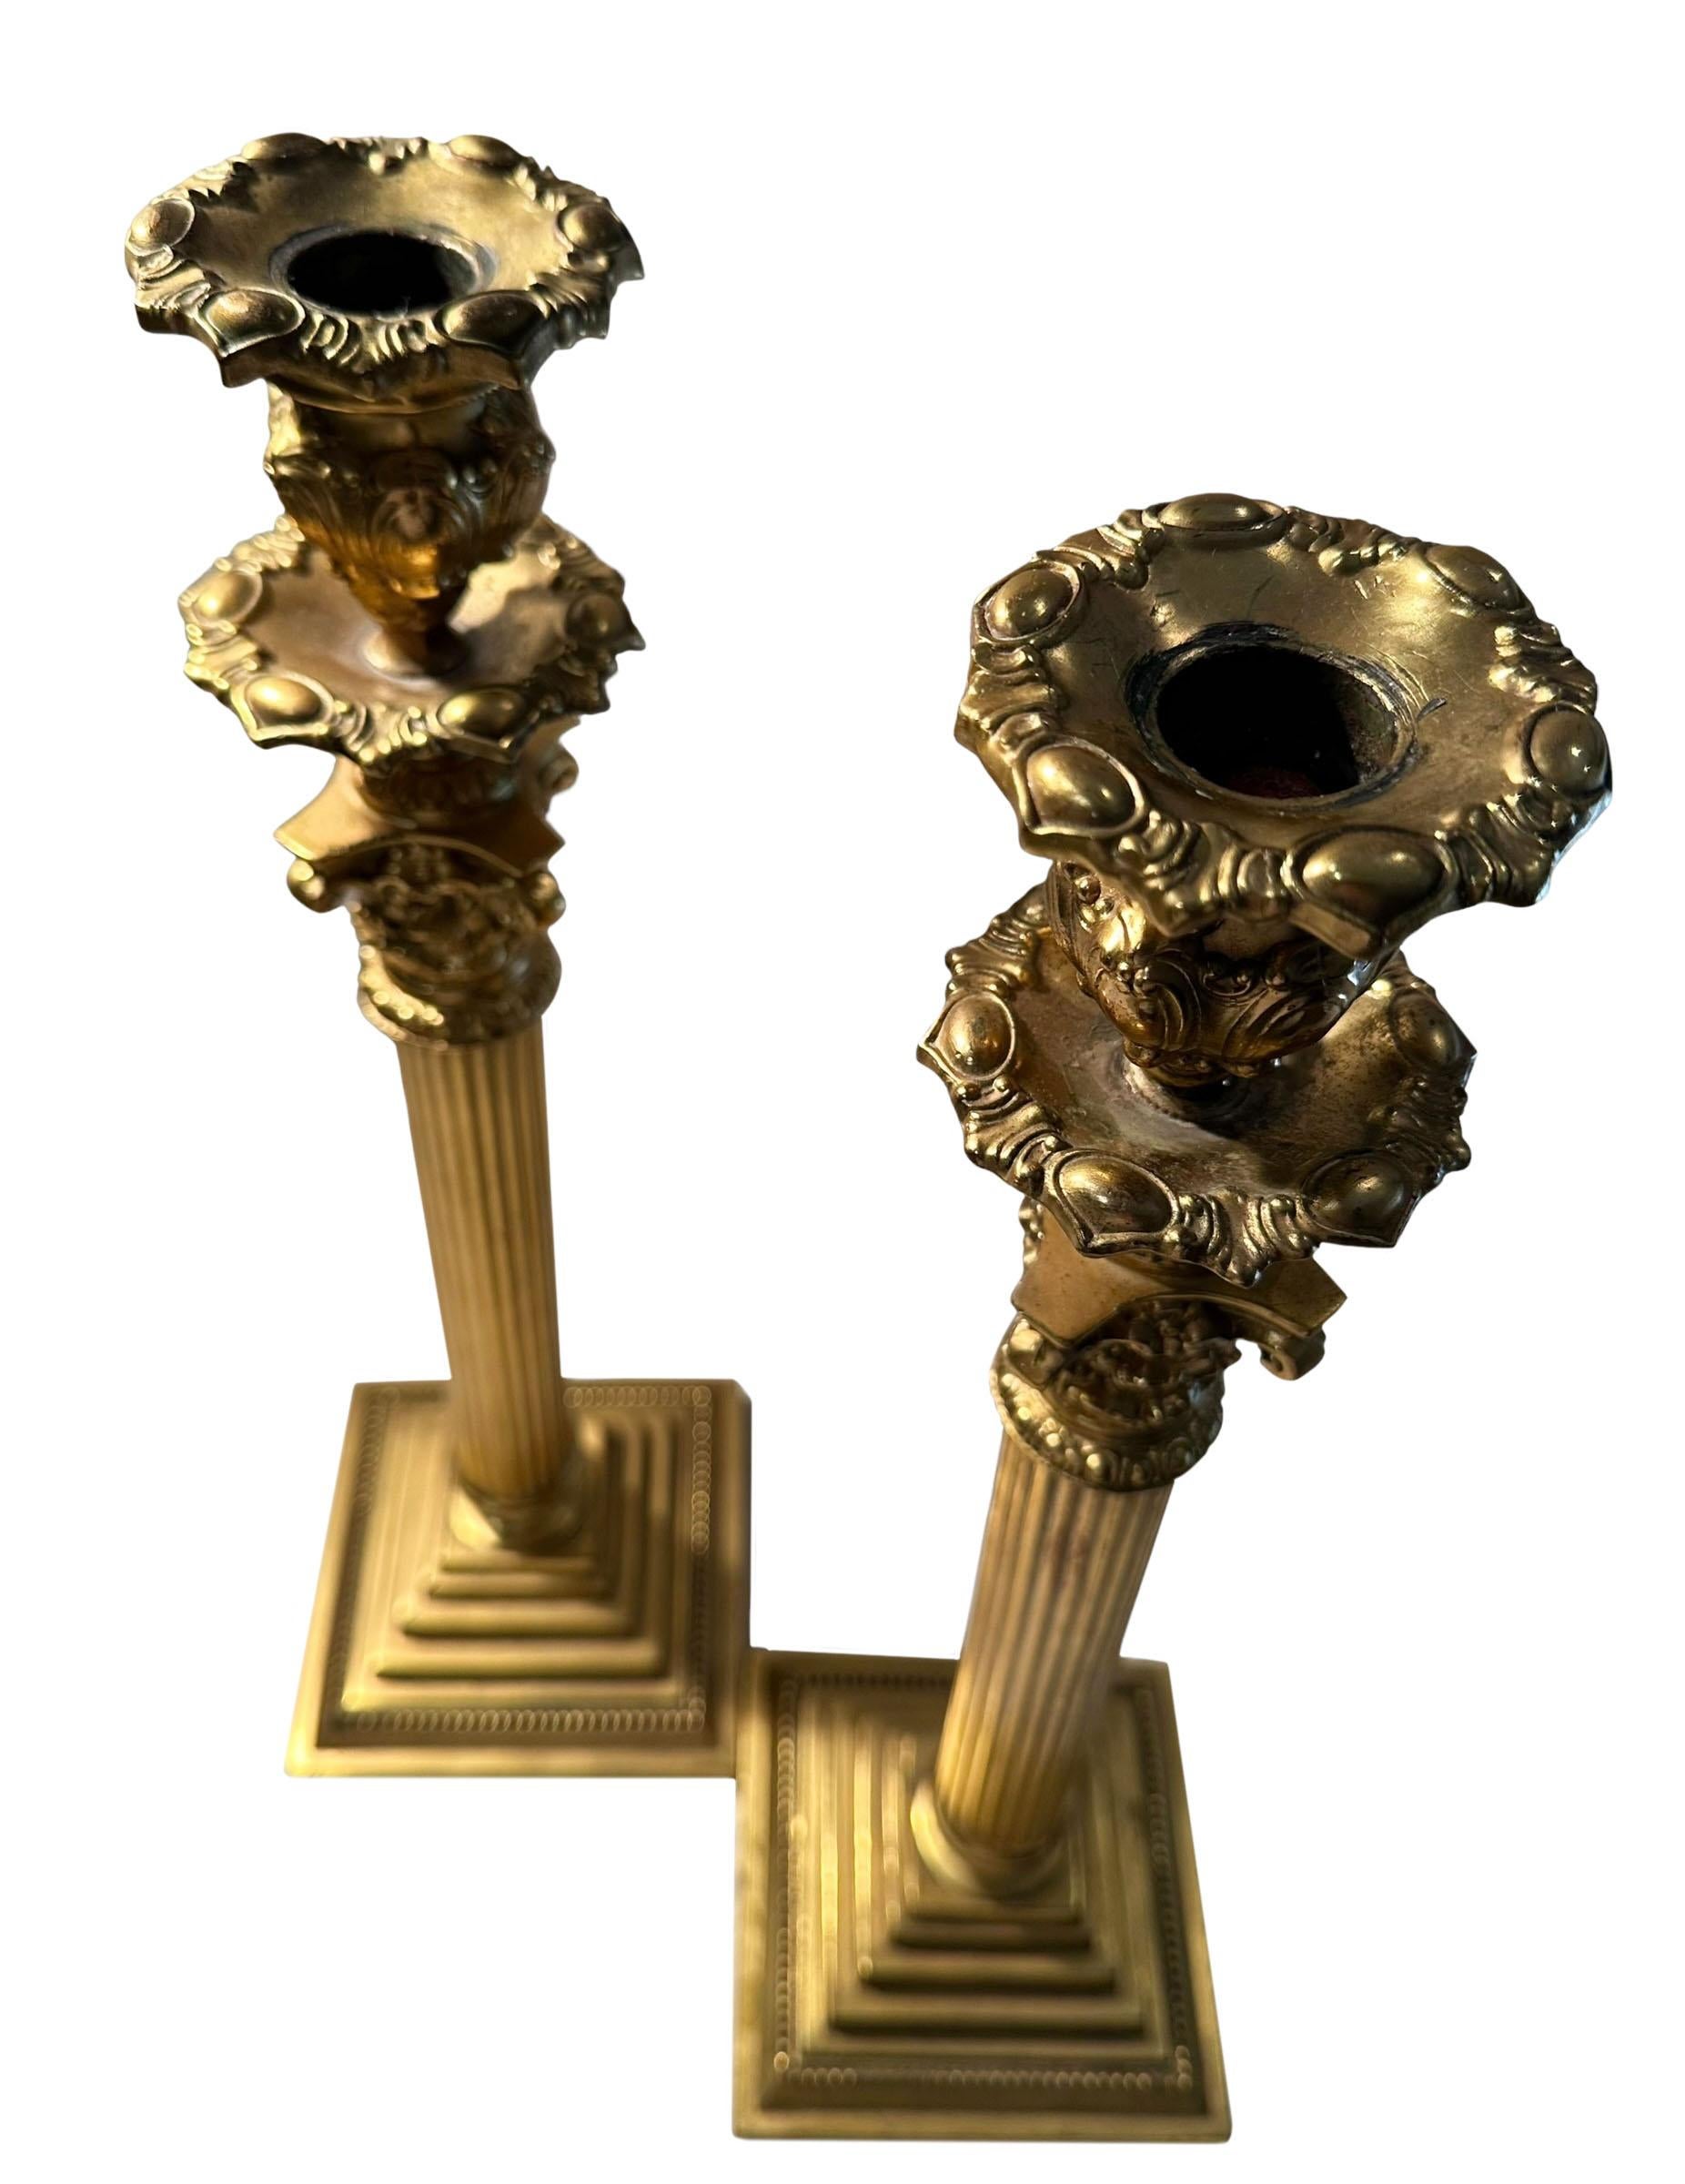 A pair of bronze dore candlesticks from England, circa 1840s. They are bronze dore with lead inside the bottom.